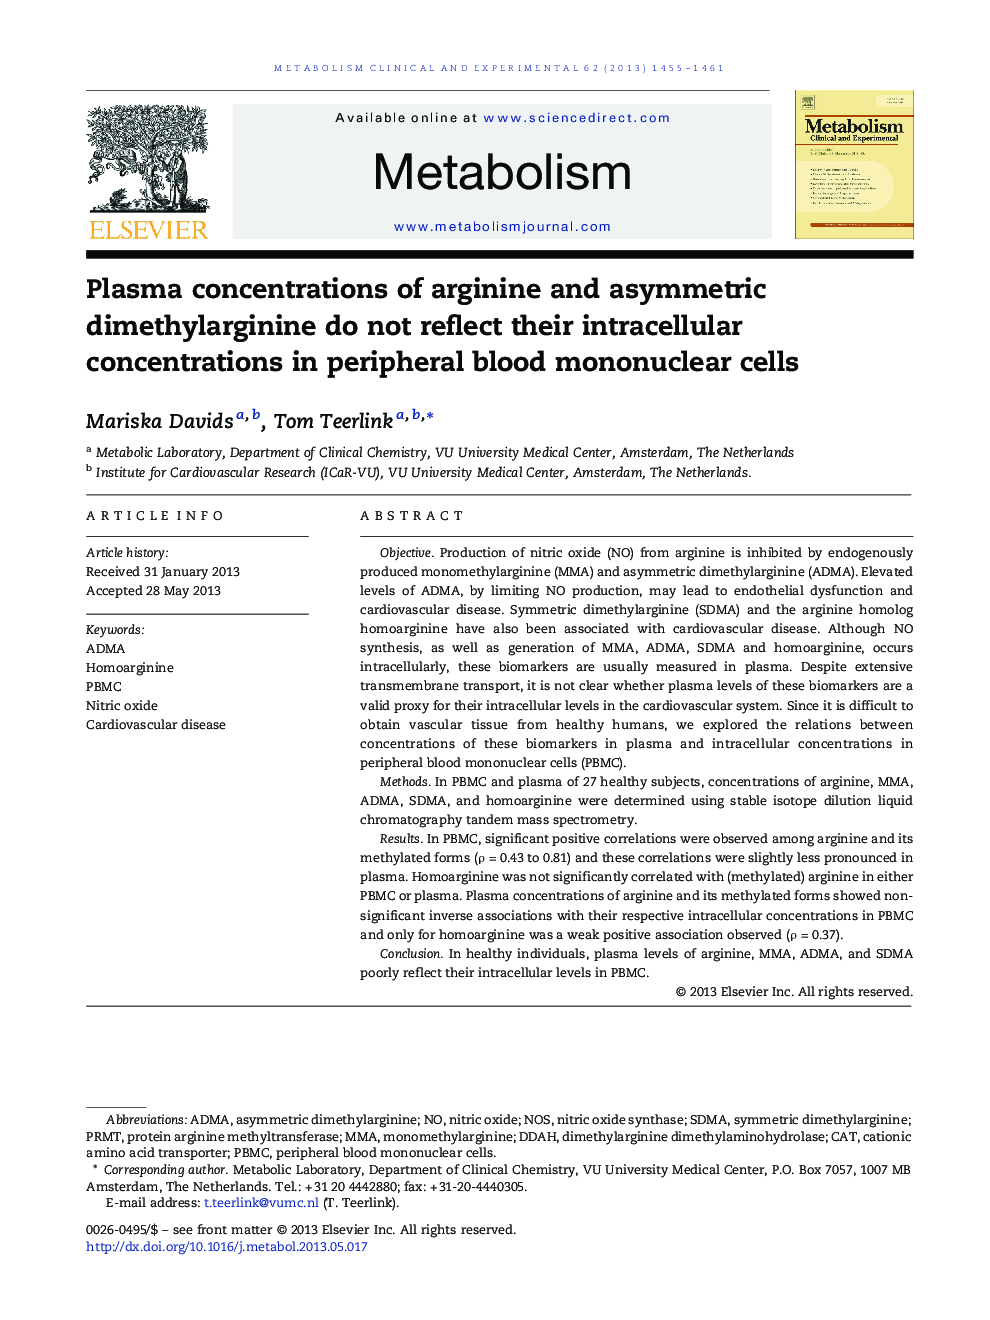 Plasma concentrations of arginine and asymmetric dimethylarginine do not reflect their intracellular concentrations in peripheral blood mononuclear cells